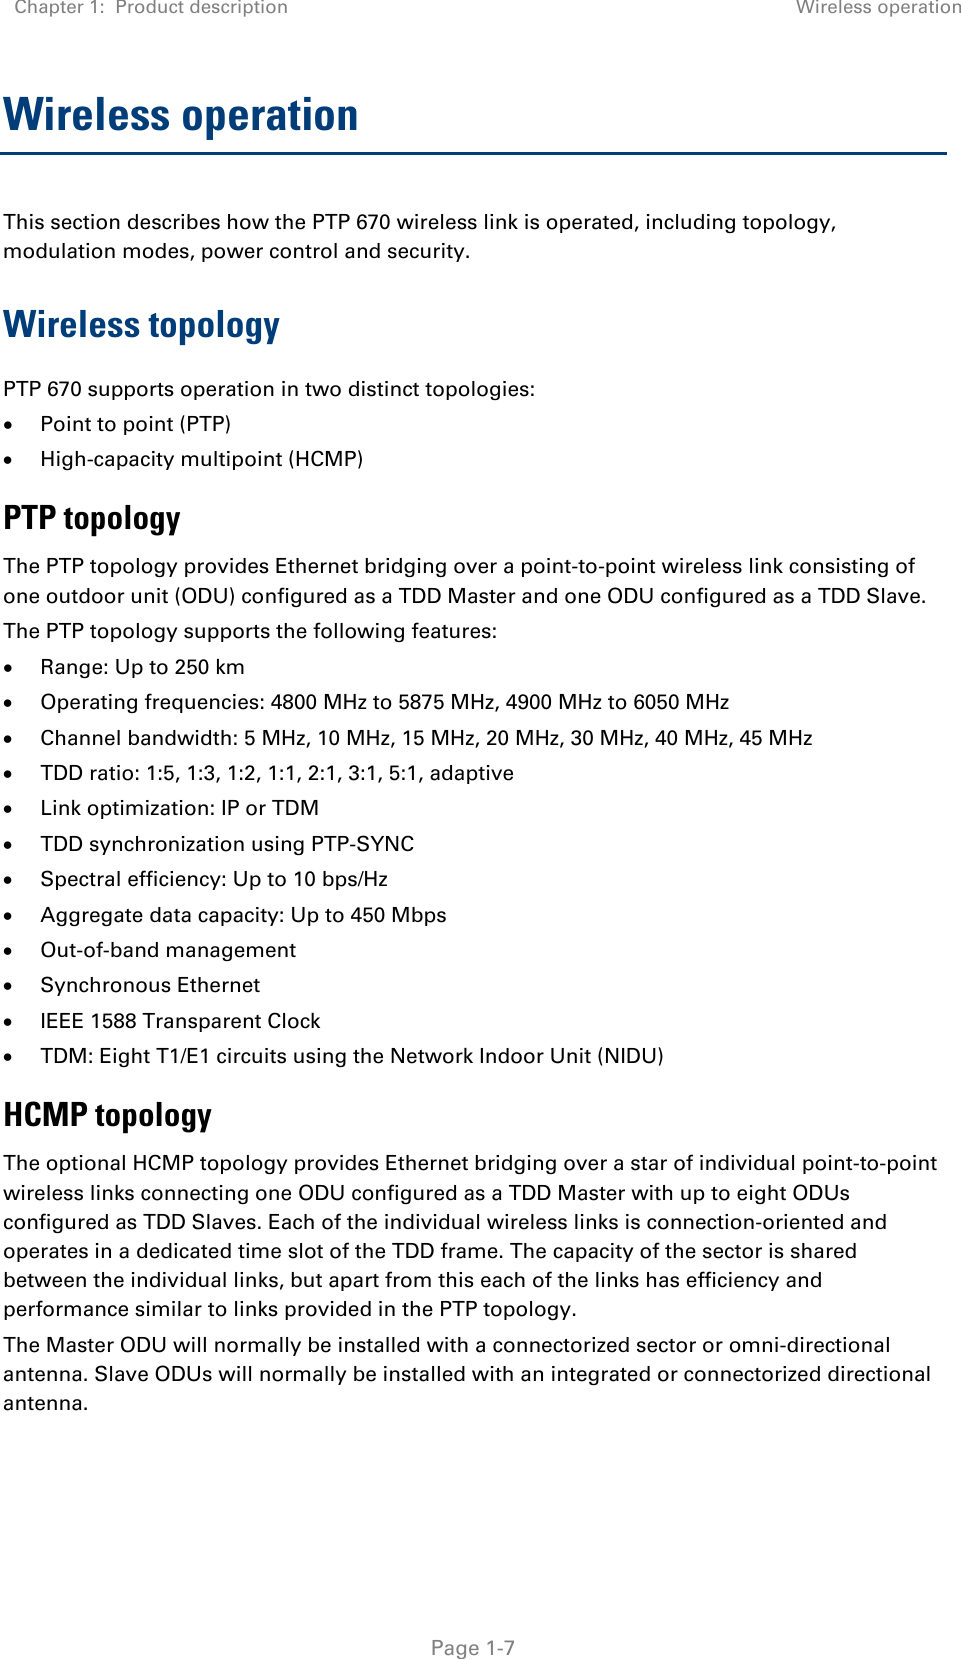 Chapter 1:  Product description Wireless operation   Page 1-7 Wireless operation This section describes how the PTP 670 wireless link is operated, including topology, modulation modes, power control and security. Wireless topology PTP 670 supports operation in two distinct topologies: • Point to point (PTP) • High-capacity multipoint (HCMP) PTP topology The PTP topology provides Ethernet bridging over a point-to-point wireless link consisting of one outdoor unit (ODU) configured as a TDD Master and one ODU configured as a TDD Slave. The PTP topology supports the following features: • Range: Up to 250 km • Operating frequencies: 4800 MHz to 5875 MHz, 4900 MHz to 6050 MHz • Channel bandwidth: 5 MHz, 10 MHz, 15 MHz, 20 MHz, 30 MHz, 40 MHz, 45 MHz • TDD ratio: 1:5, 1:3, 1:2, 1:1, 2:1, 3:1, 5:1, adaptive • Link optimization: IP or TDM • TDD synchronization using PTP-SYNC • Spectral efficiency: Up to 10 bps/Hz • Aggregate data capacity: Up to 450 Mbps • Out-of-band management • Synchronous Ethernet • IEEE 1588 Transparent Clock • TDM: Eight T1/E1 circuits using the Network Indoor Unit (NIDU) HCMP topology The optional HCMP topology provides Ethernet bridging over a star of individual point-to-point wireless links connecting one ODU configured as a TDD Master with up to eight ODUs configured as TDD Slaves. Each of the individual wireless links is connection-oriented and operates in a dedicated time slot of the TDD frame. The capacity of the sector is shared between the individual links, but apart from this each of the links has efficiency and performance similar to links provided in the PTP topology. The Master ODU will normally be installed with a connectorized sector or omni-directional antenna. Slave ODUs will normally be installed with an integrated or connectorized directional antenna. 